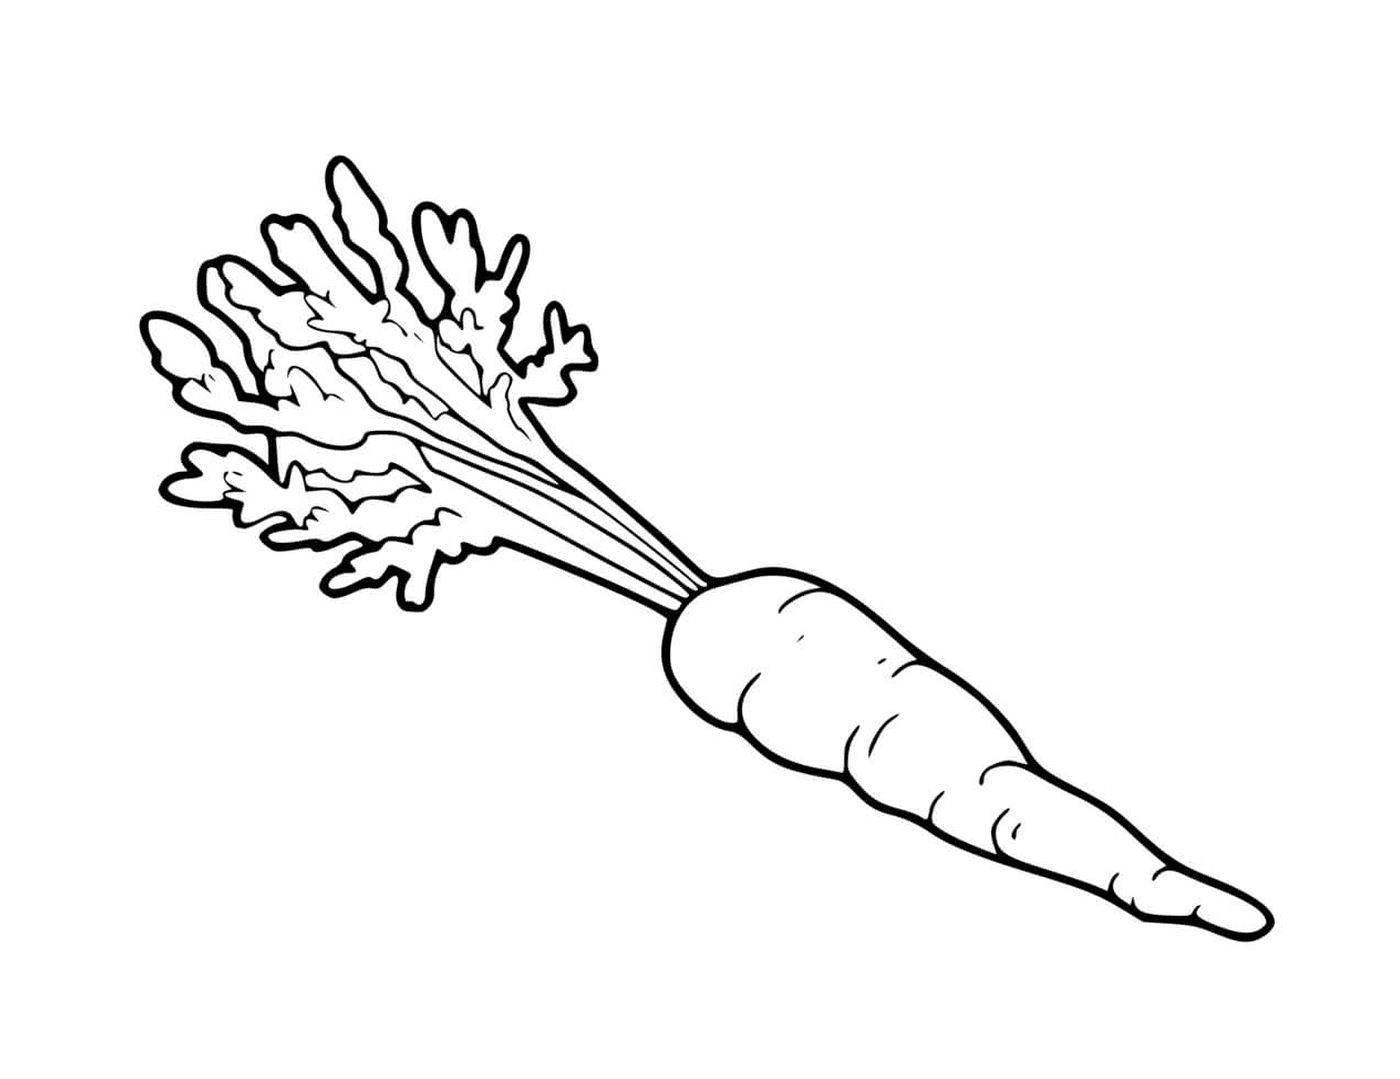  Orange carrot vegetable, a carrot with leaves 